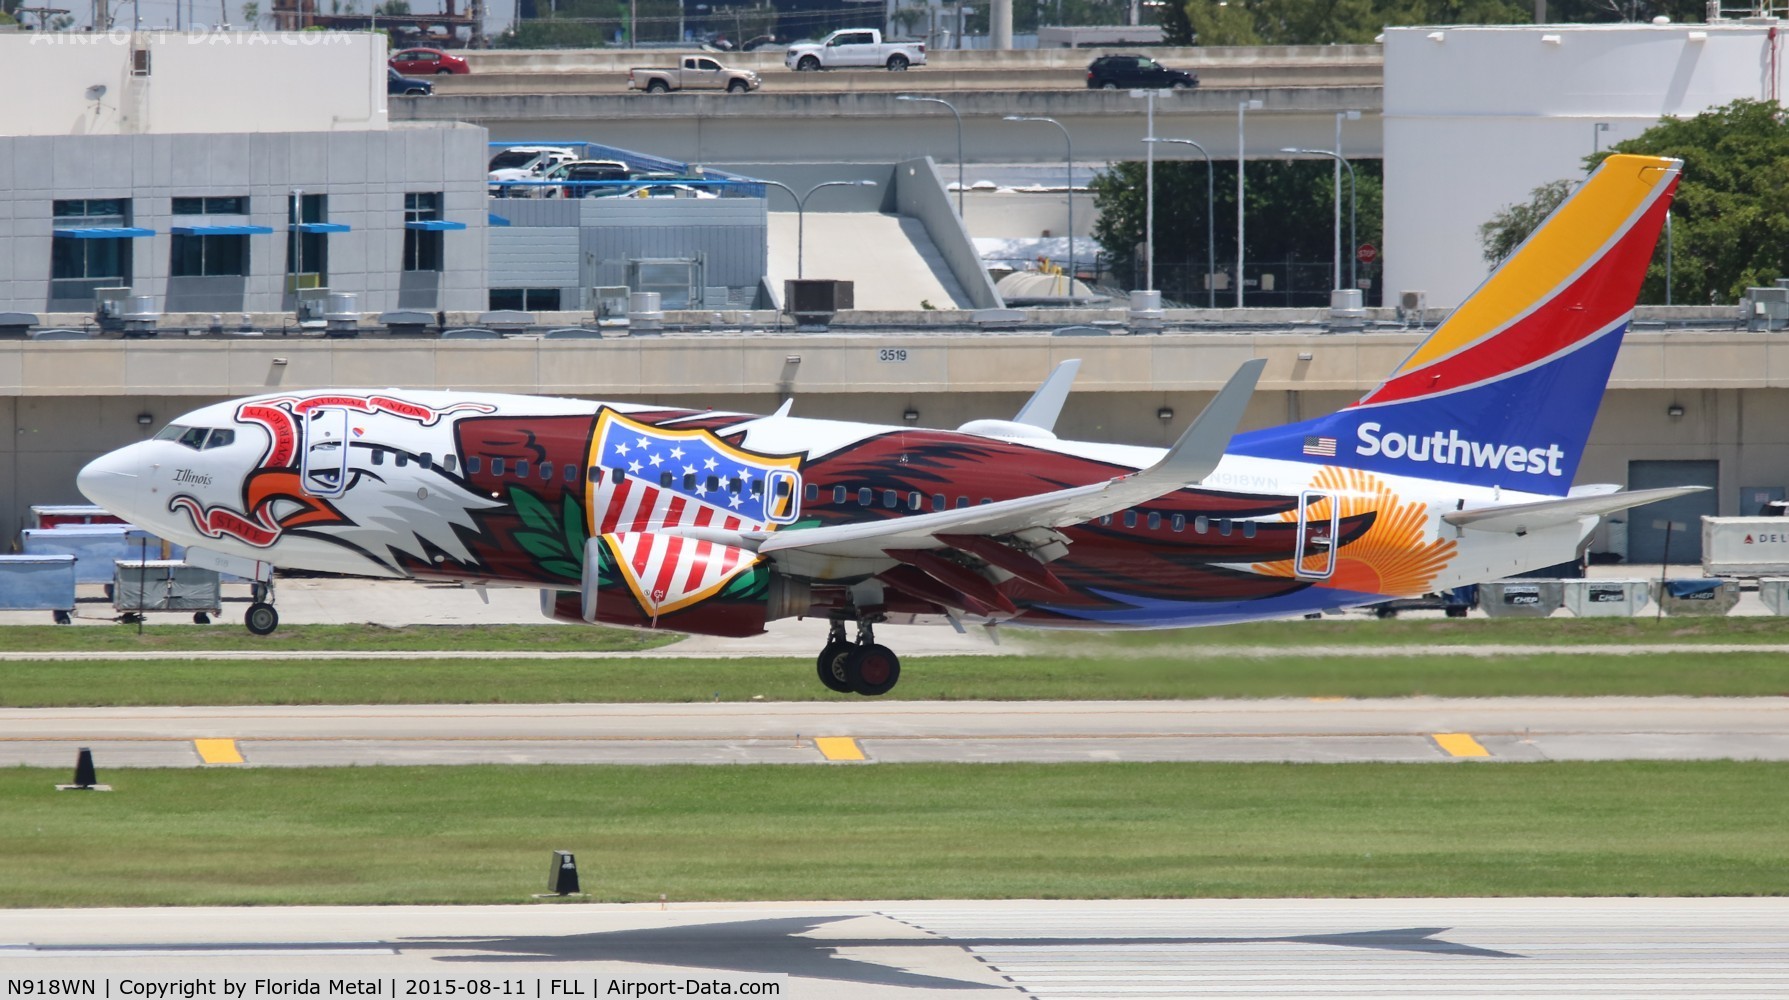 N918WN, 2008 Boeing 737-7H4 C/N 29843, Illinois One with new tail colors